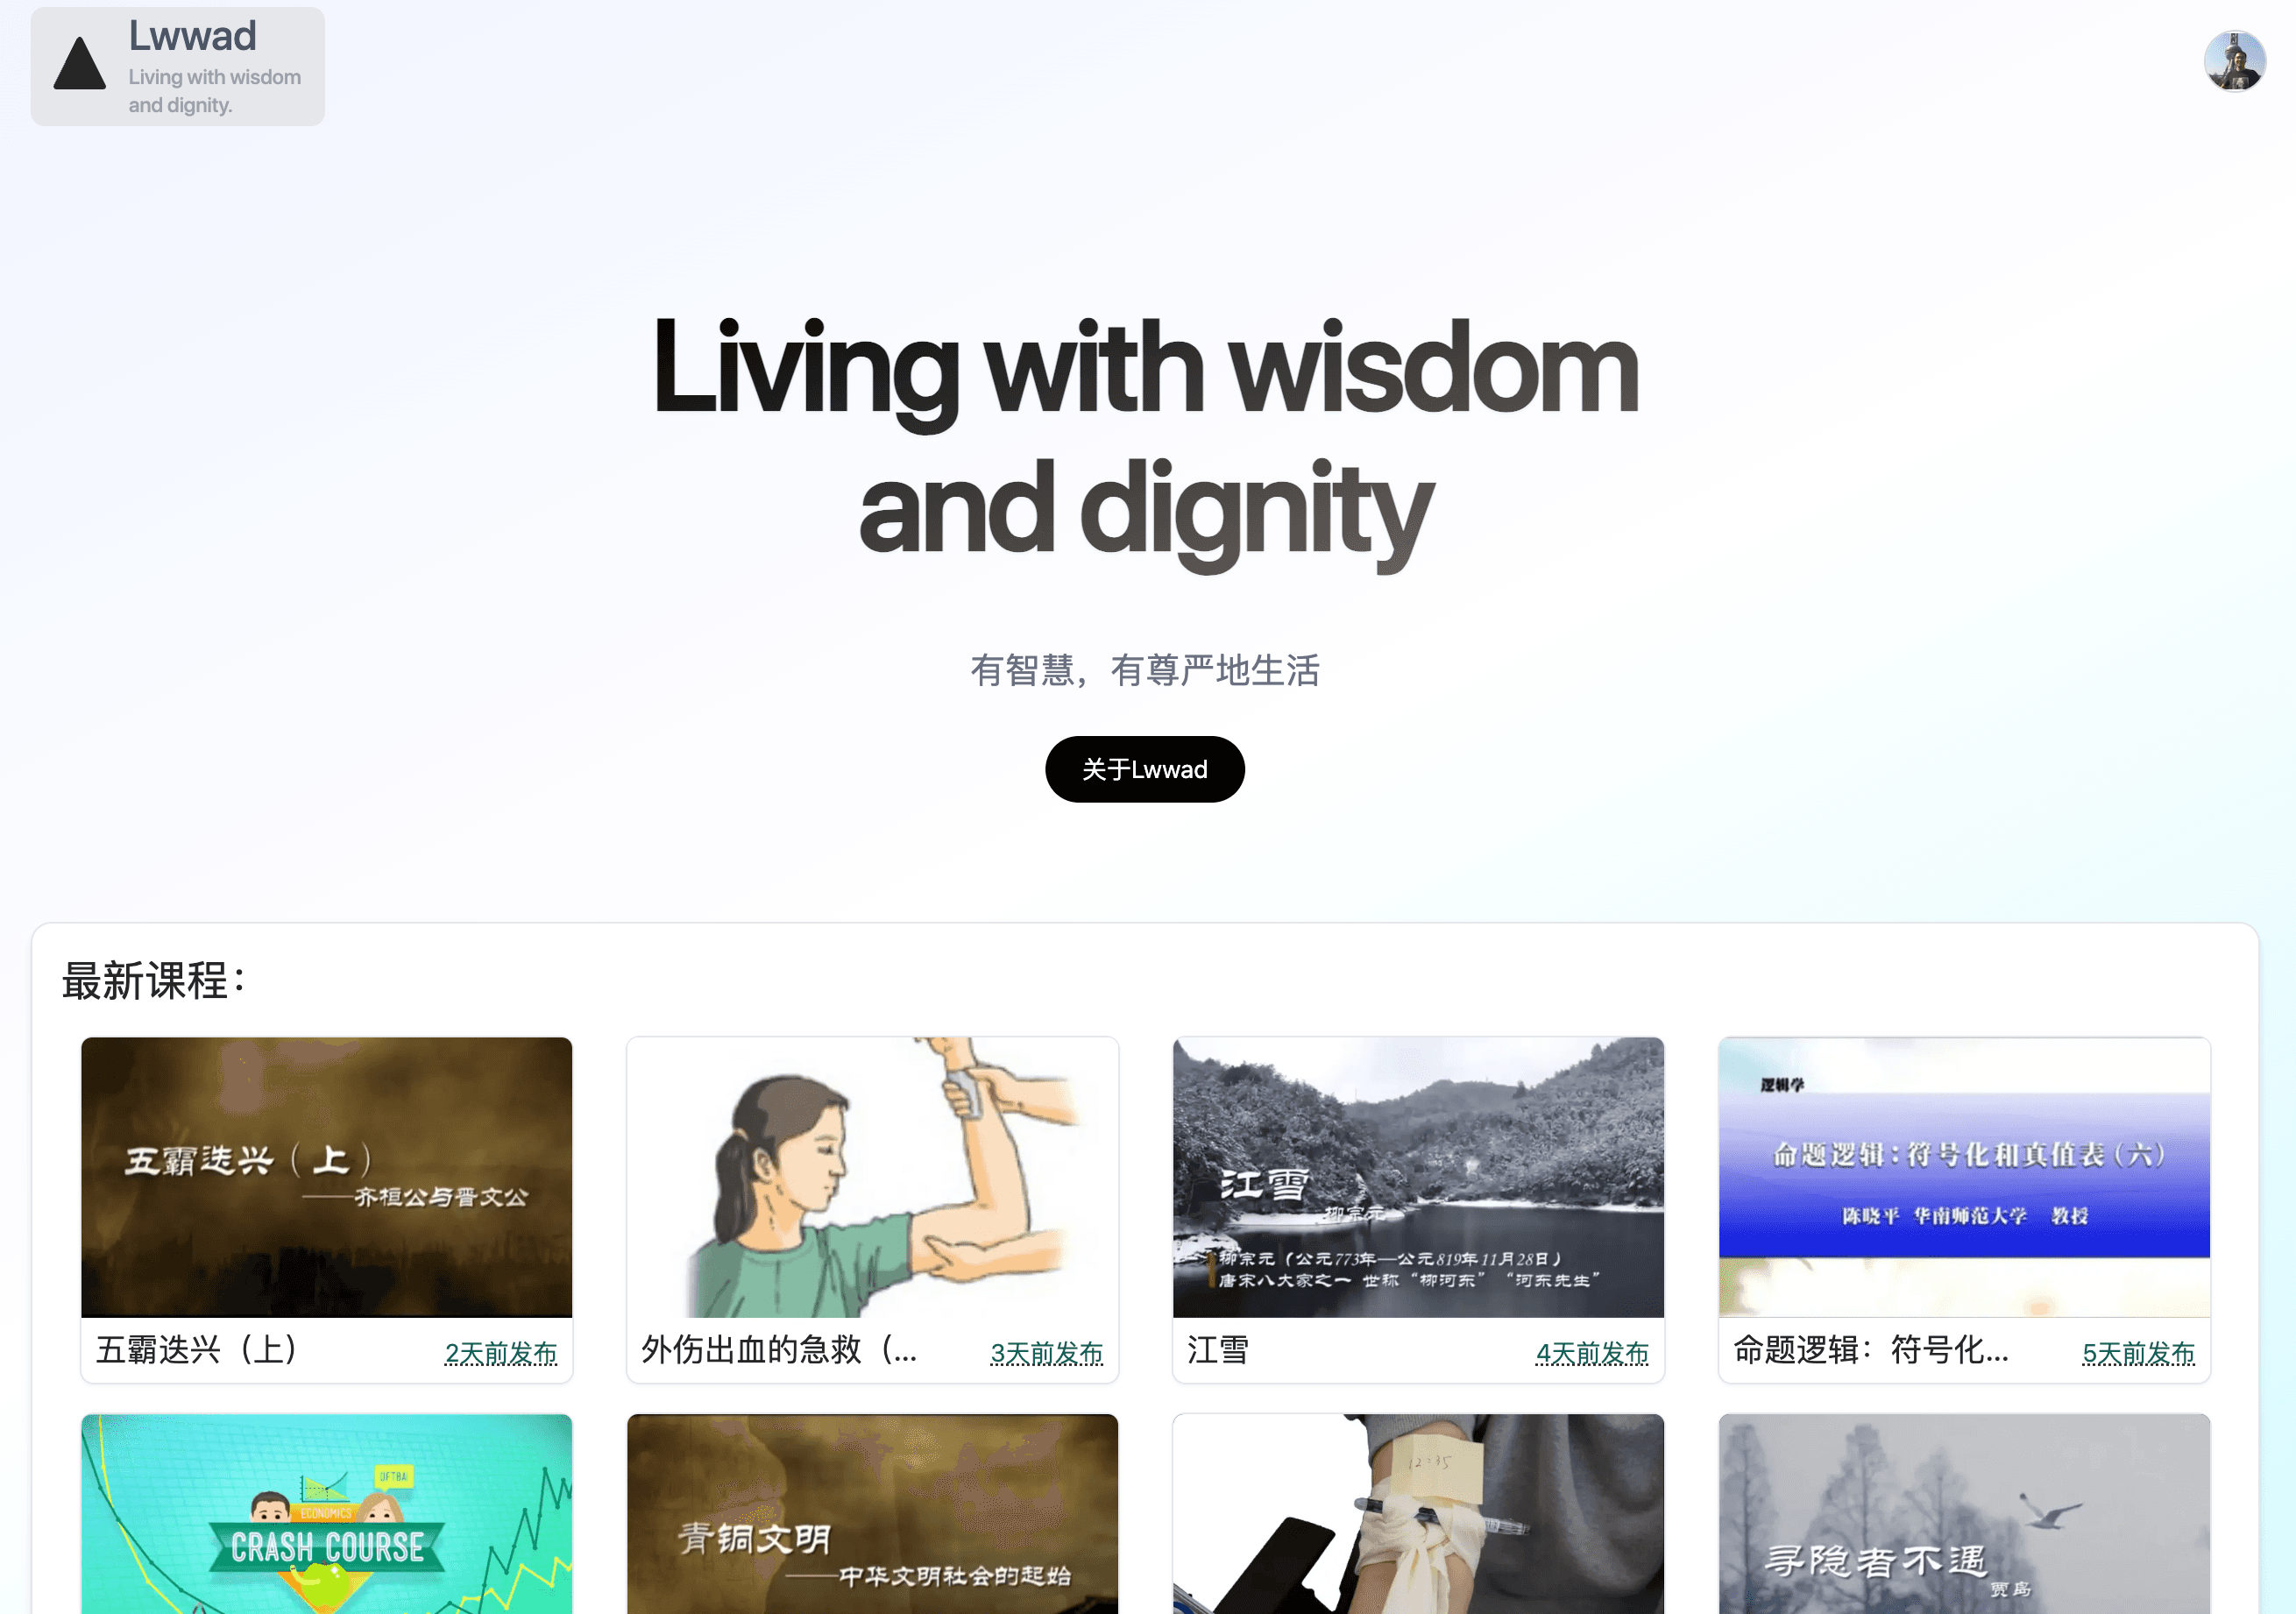 Lwwad - Living with wisdom and dignity